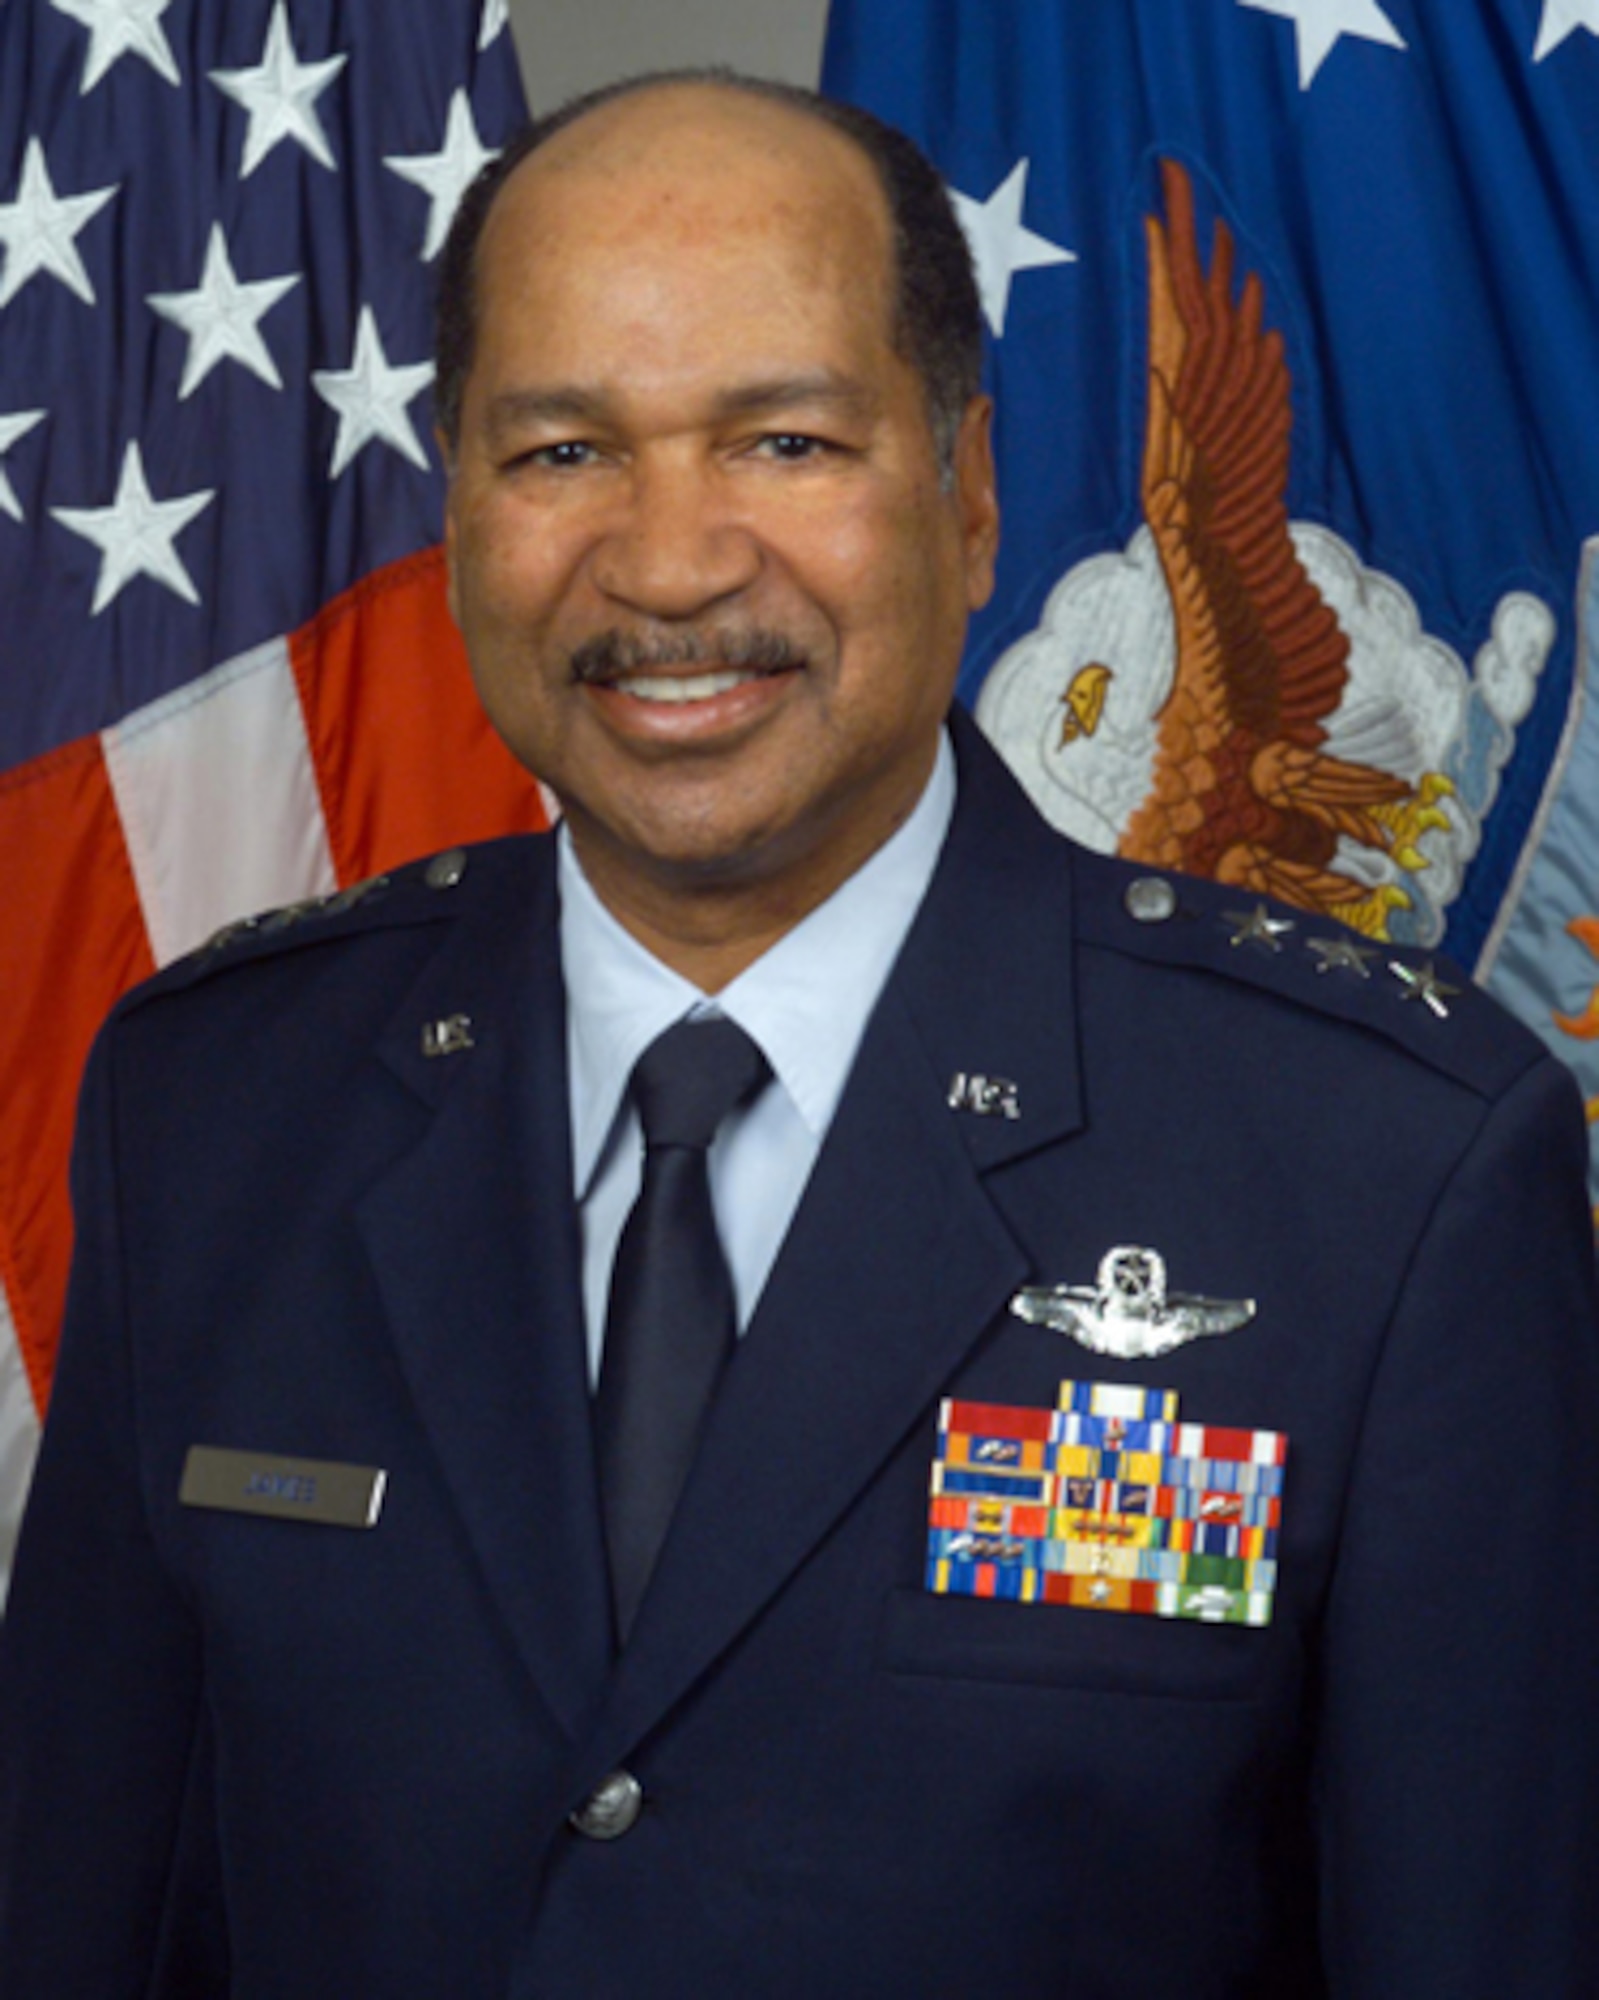 Lt. Gen. Daniel James III was commissioned in 1968 and served 10 years on active duty. He joined the Texas Air National Guard in 1978 and became director of the Air National Guard in 2002. (U.S. Air Force photo)